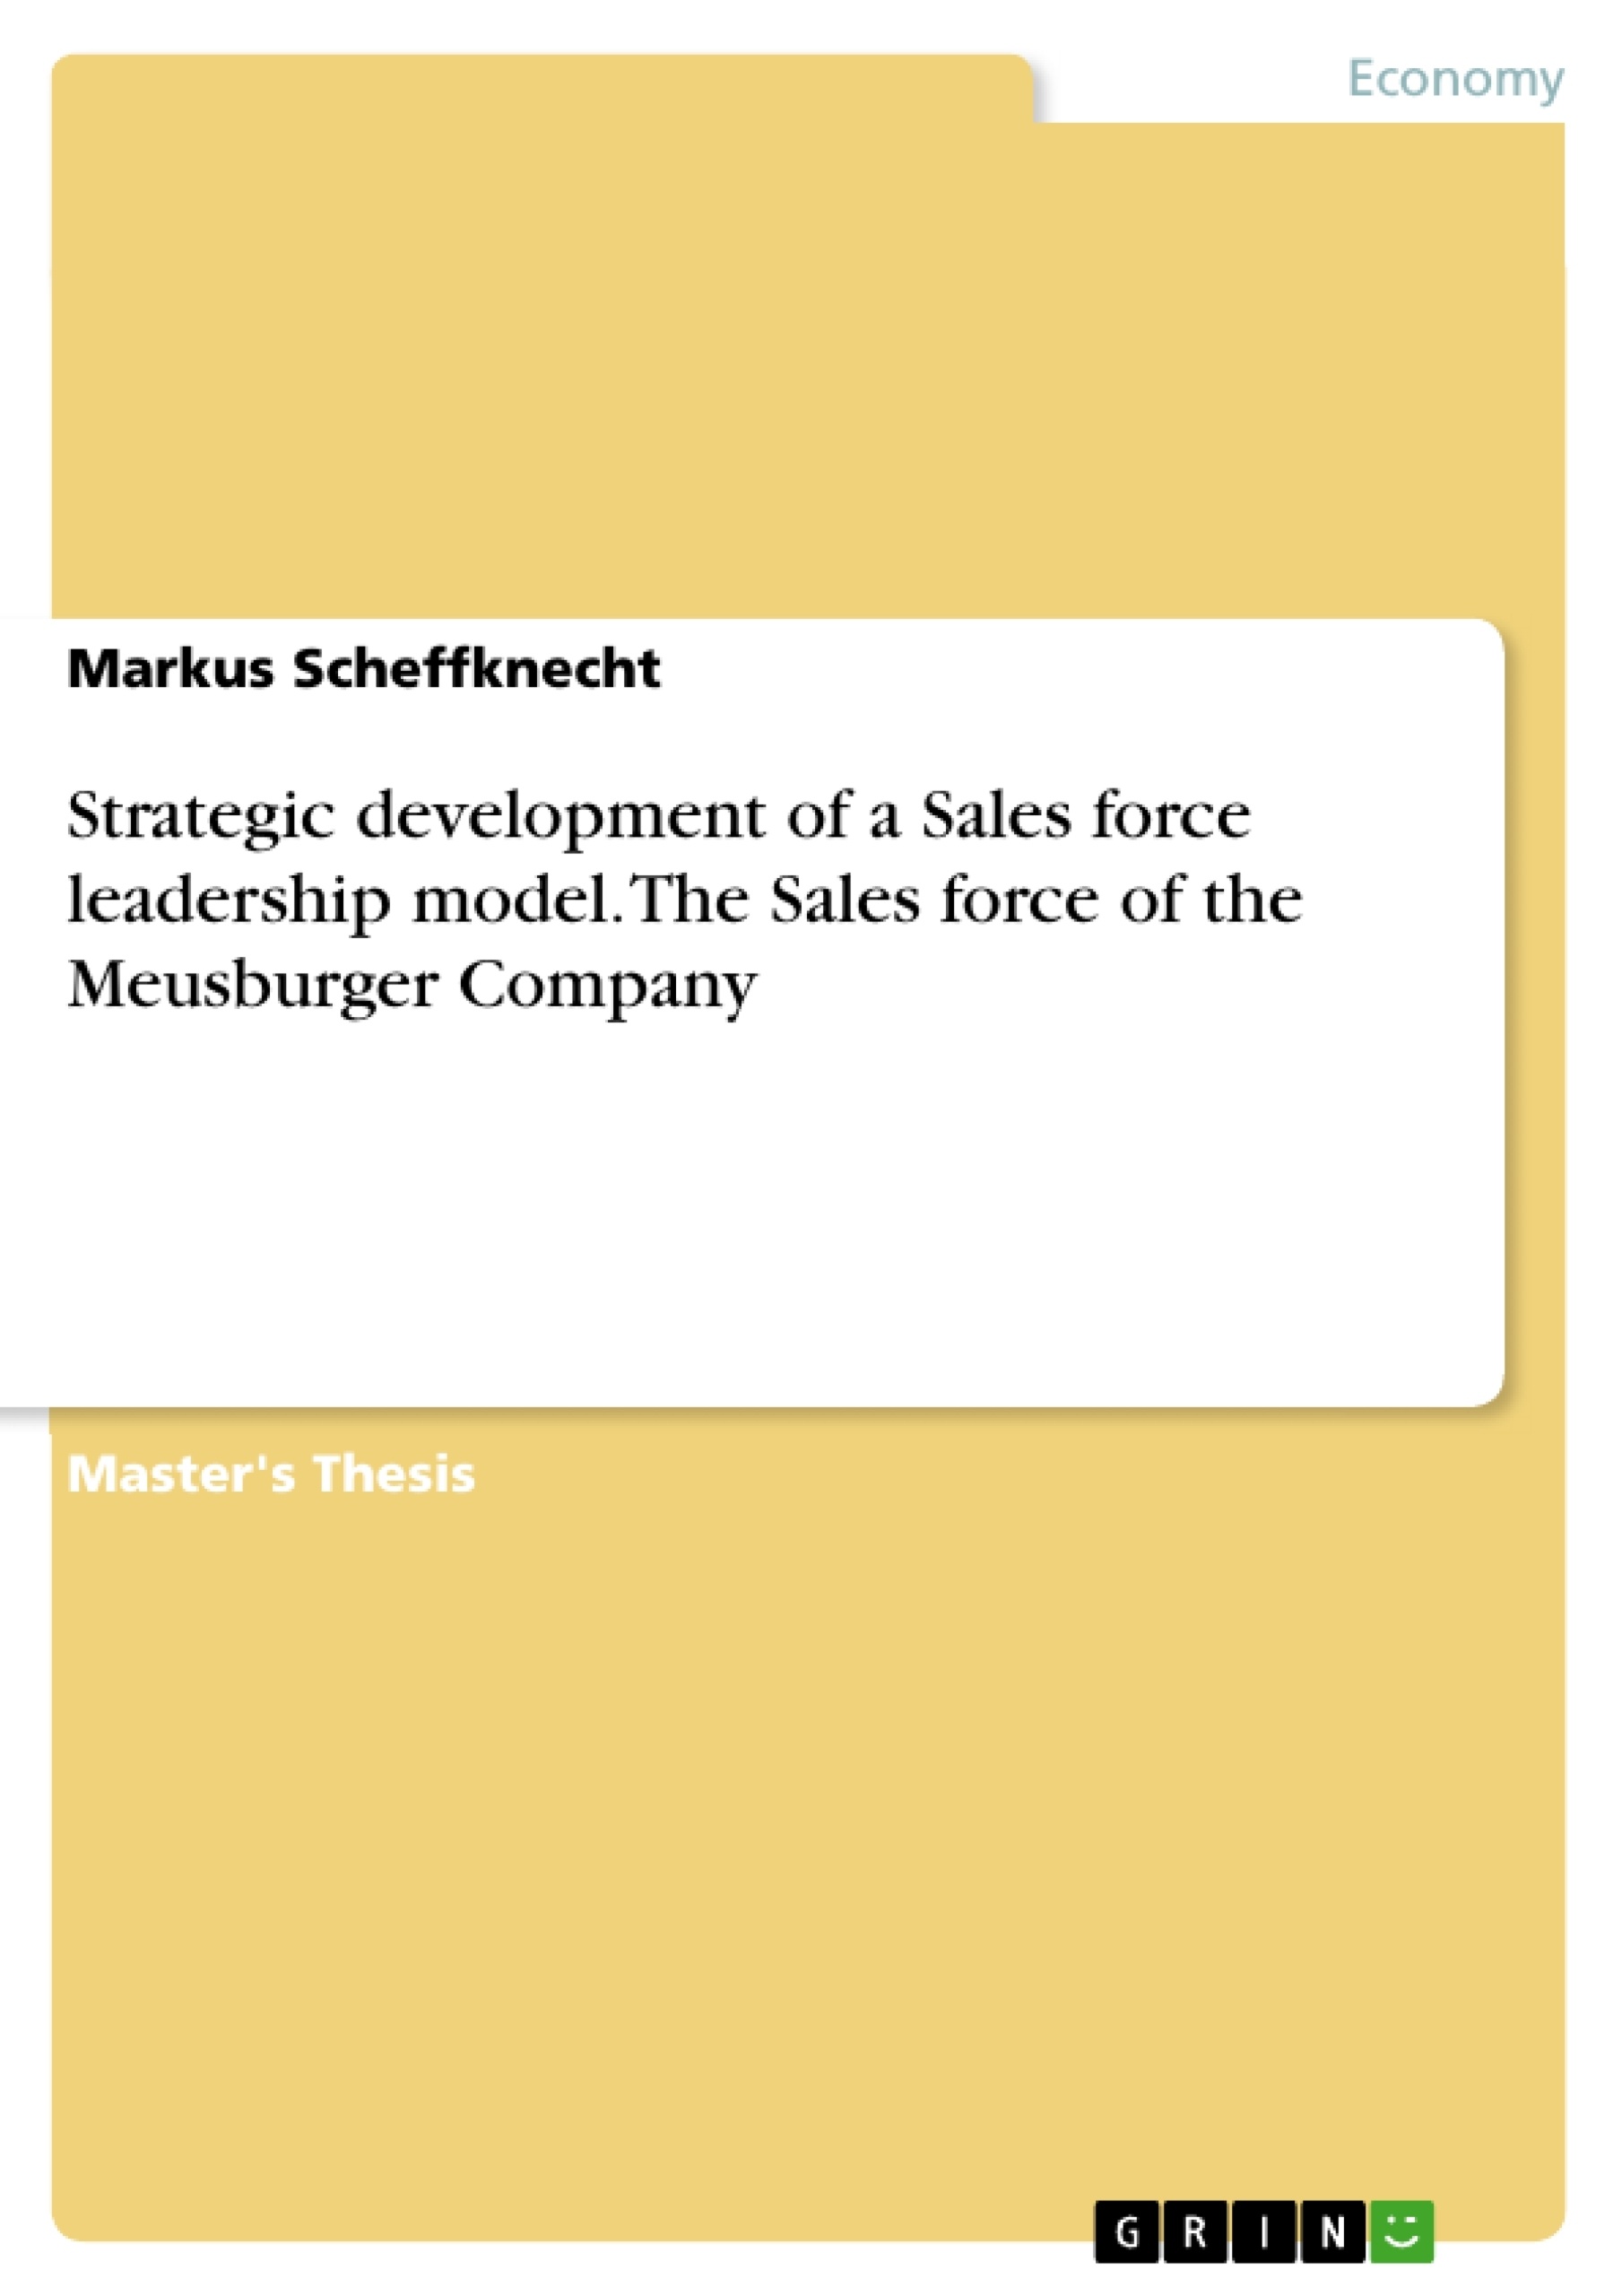 Title: Strategic development of a Sales force leadership model. The Sales force of the Meusburger Company